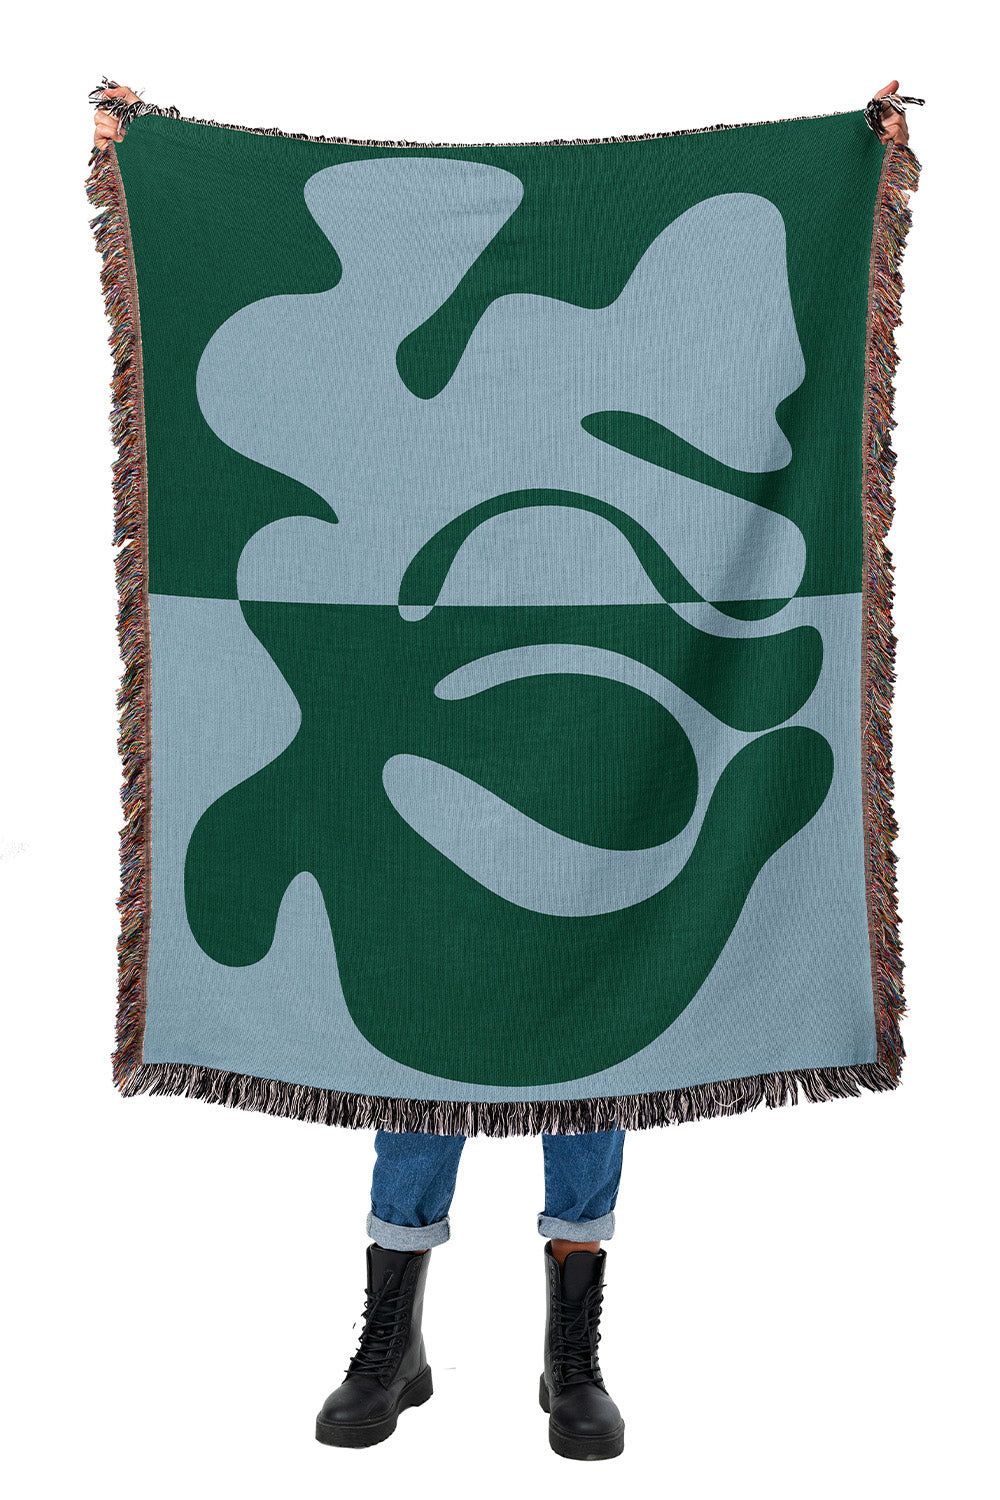 Blue and Green Organic Fusion Cotton Woven Throw Blanket showcasing a two-tone abstract design with organic shapes.